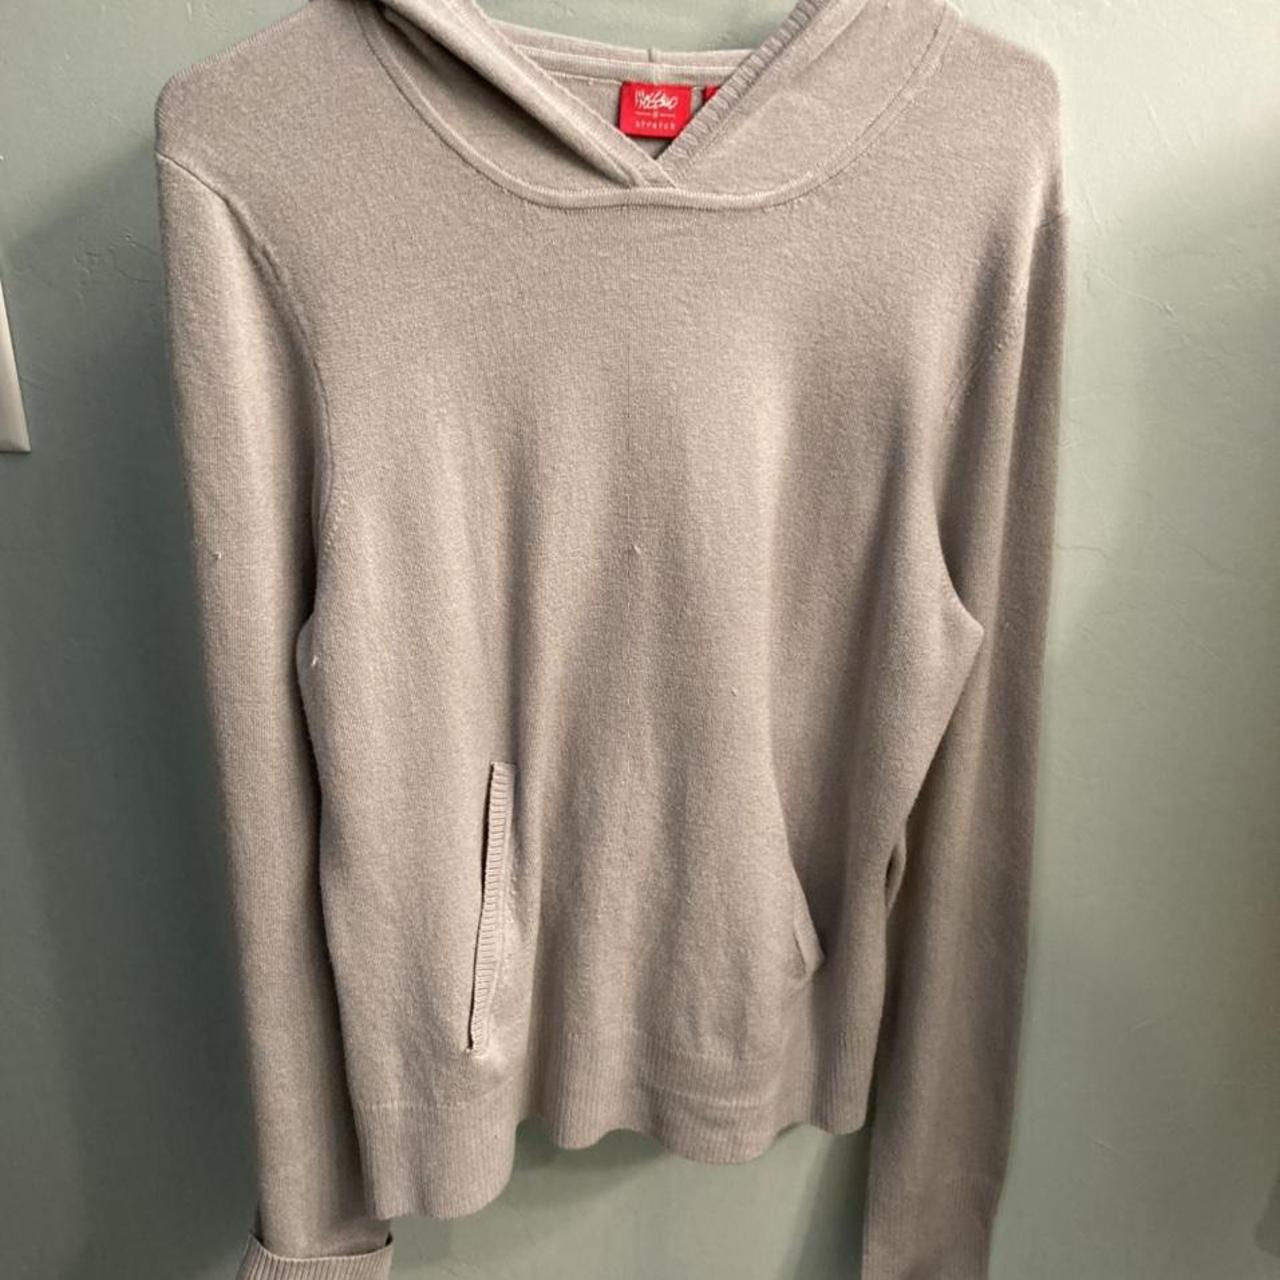 Product Image 1 - Hoody in light grey with